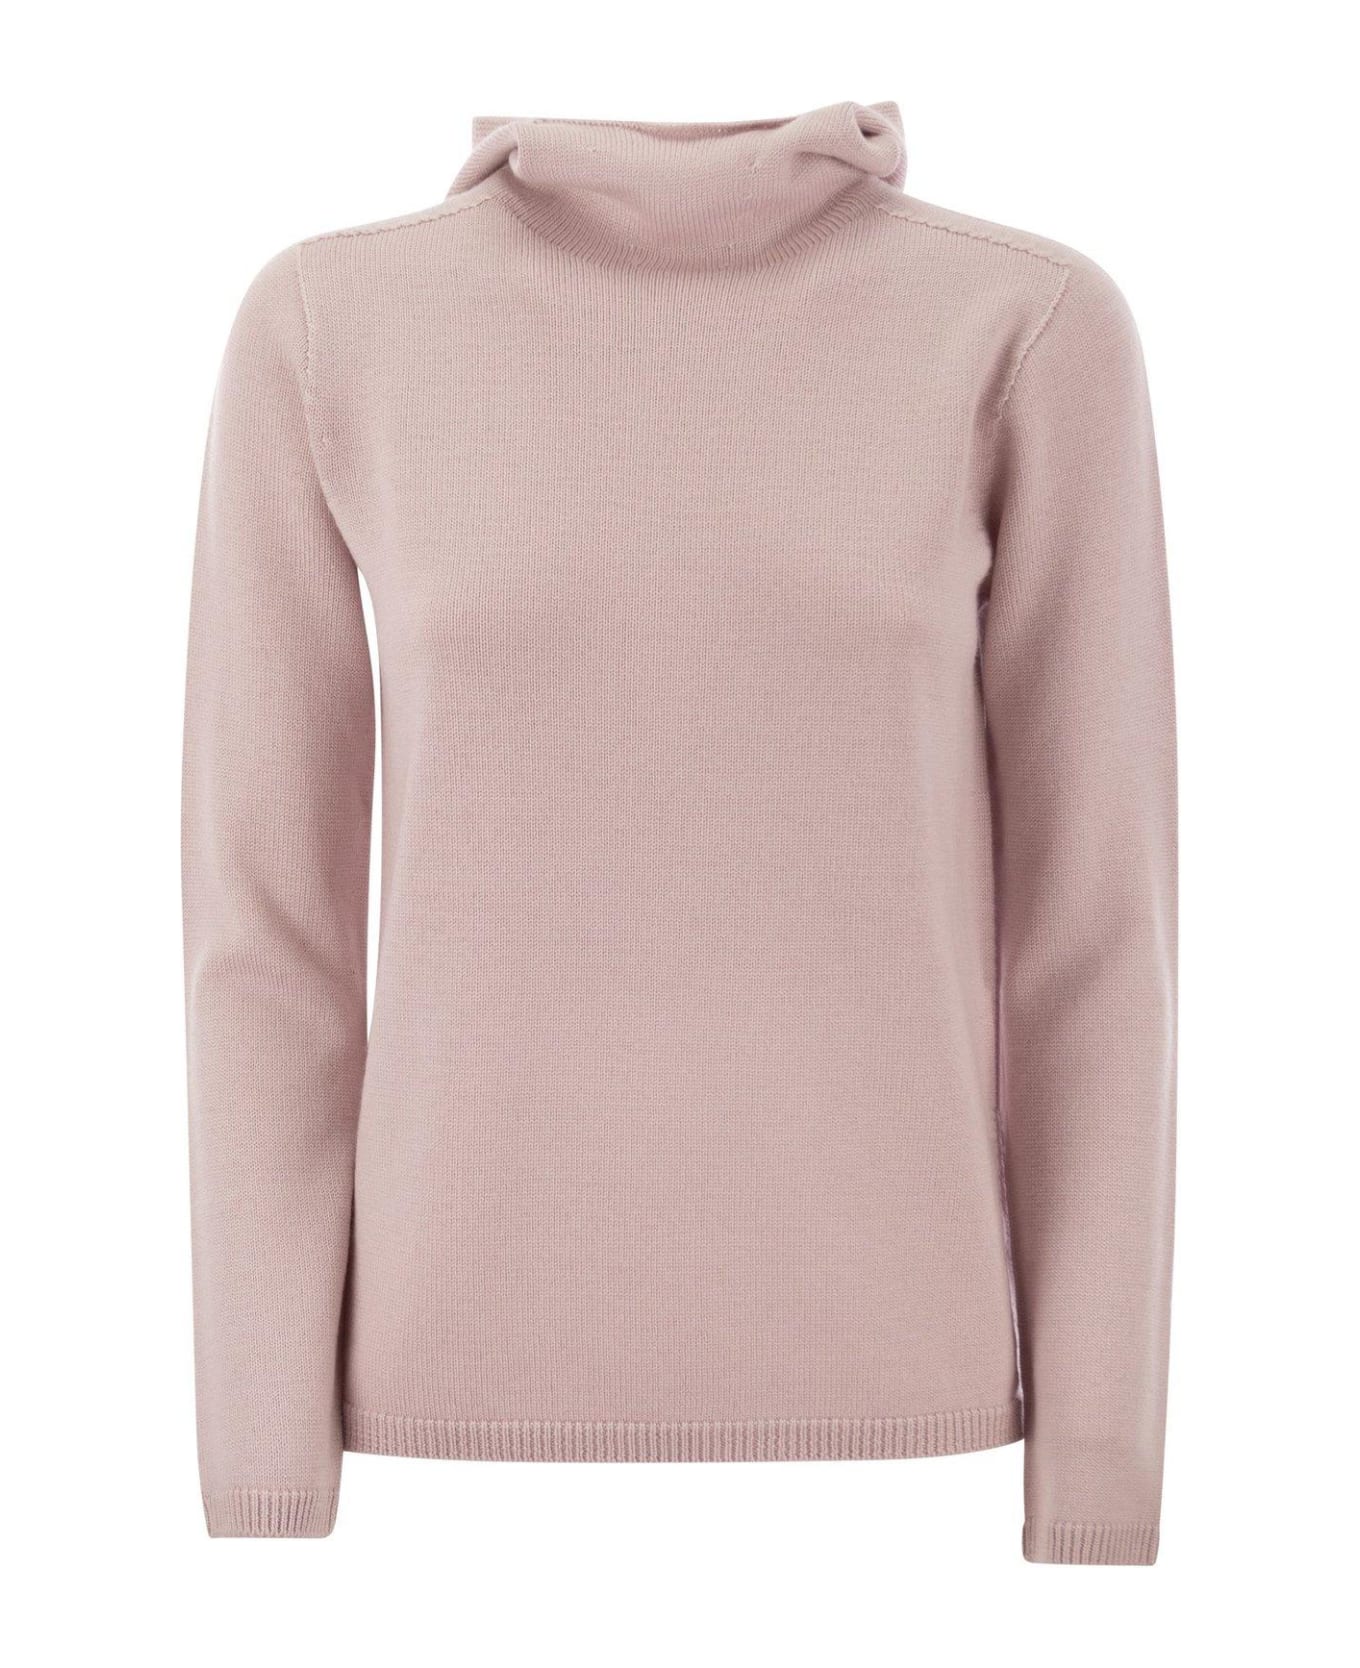 Max Mara The Cube Turtleneck Knitted Hoodie - Rosa ニットウェア